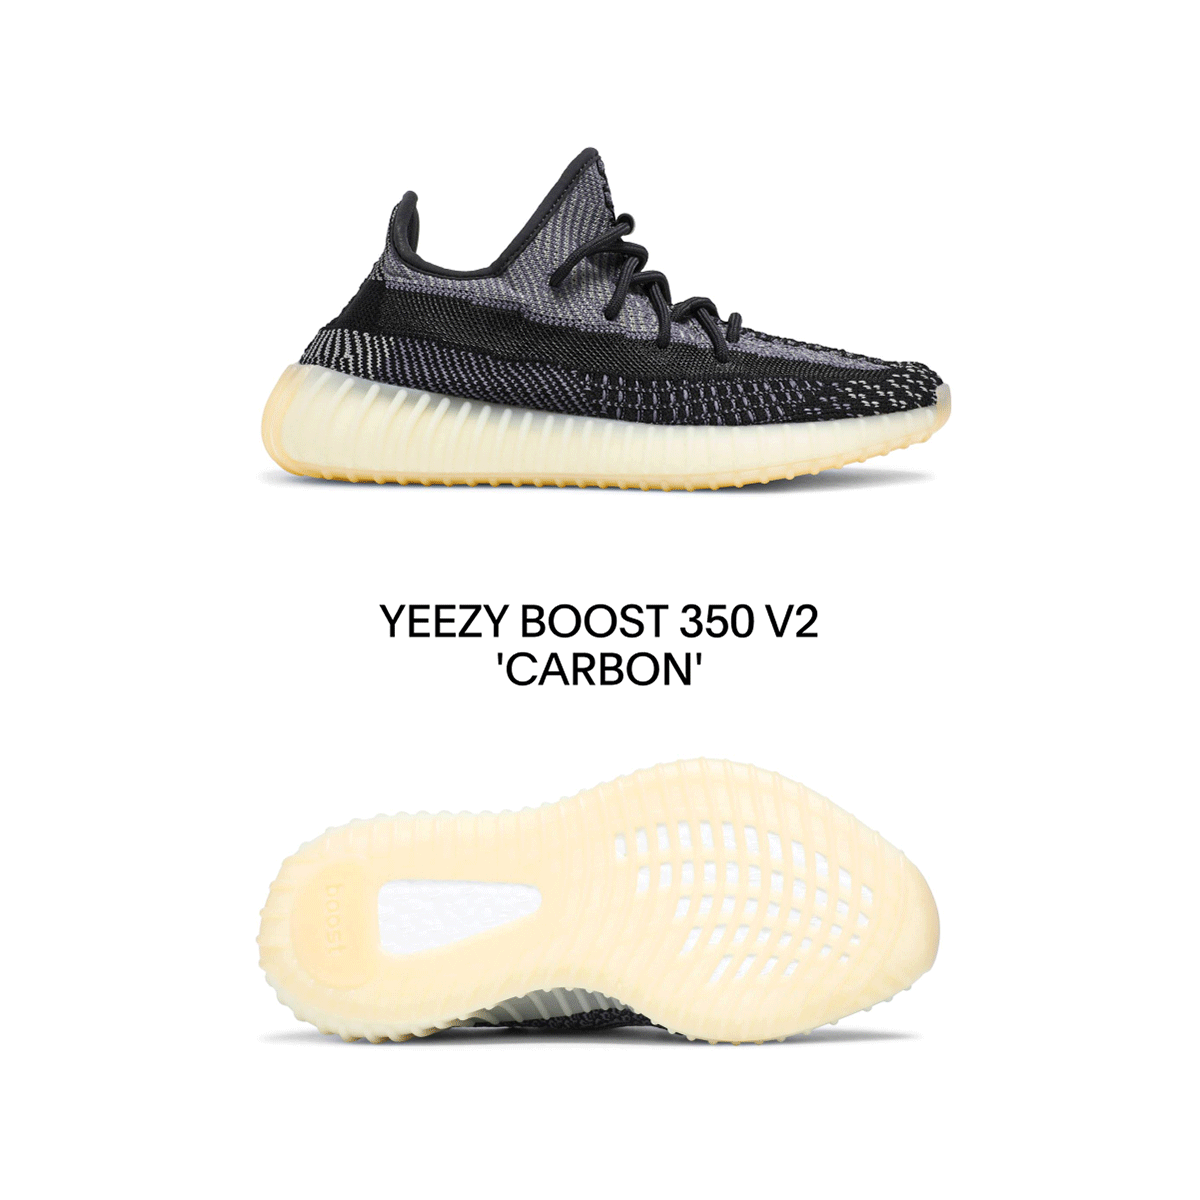 yeezys that just dropped